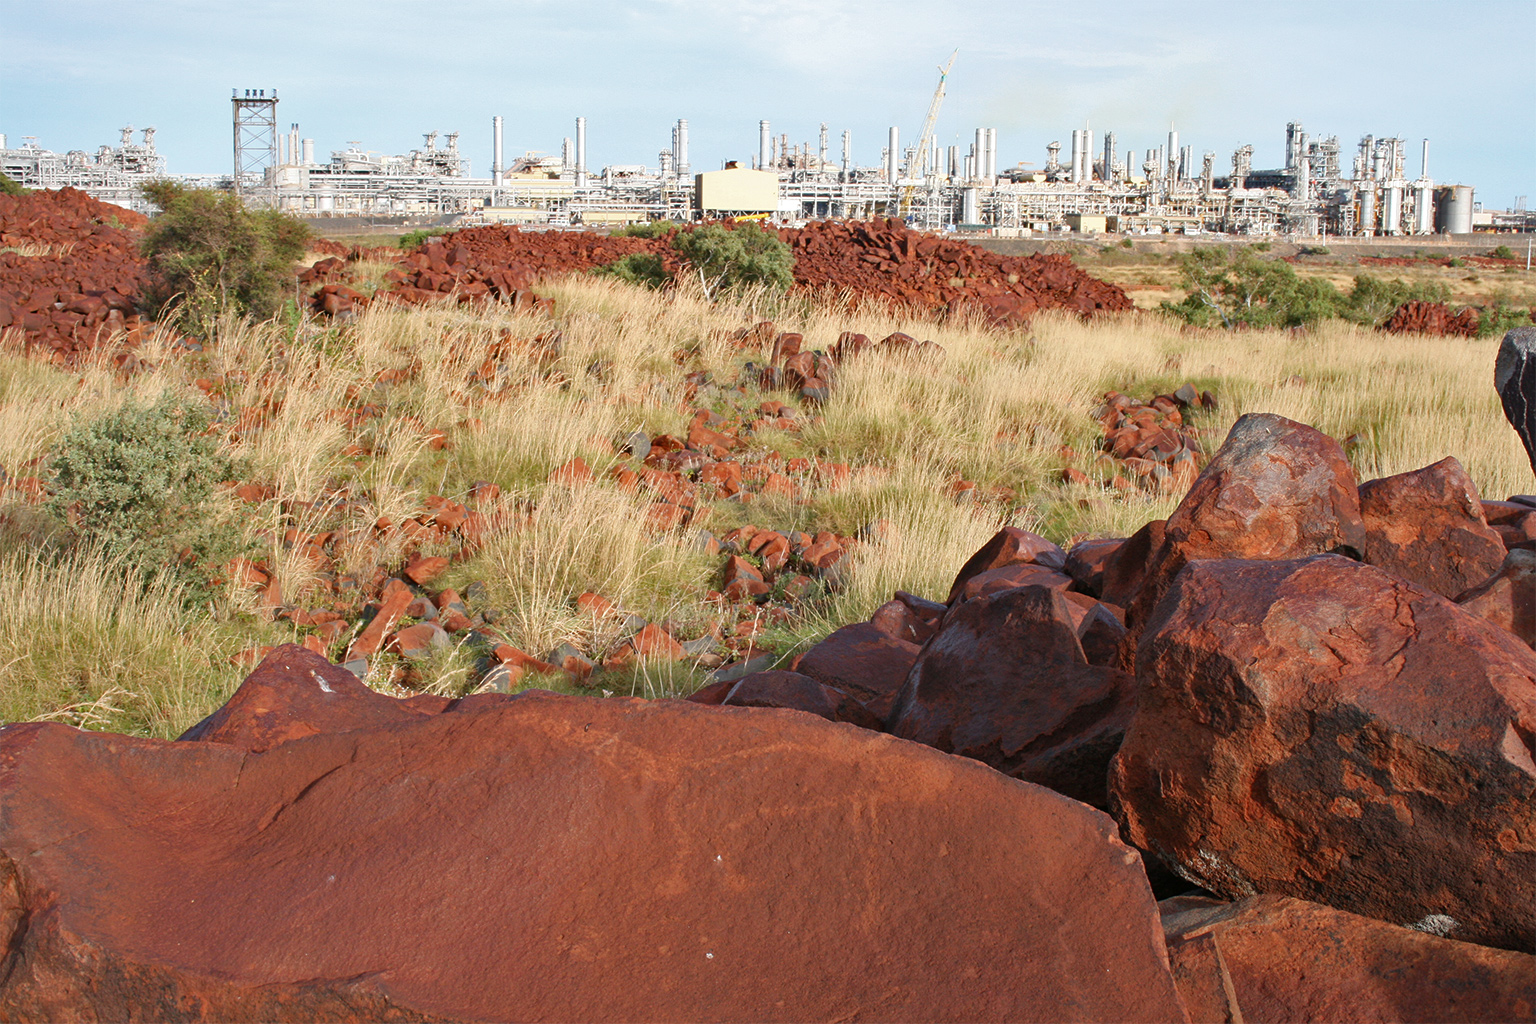 Woodside Energy factory can be seen beyond the red rocks of Murujuga. The petroglyph of a kangaroo can be seen on the rock.